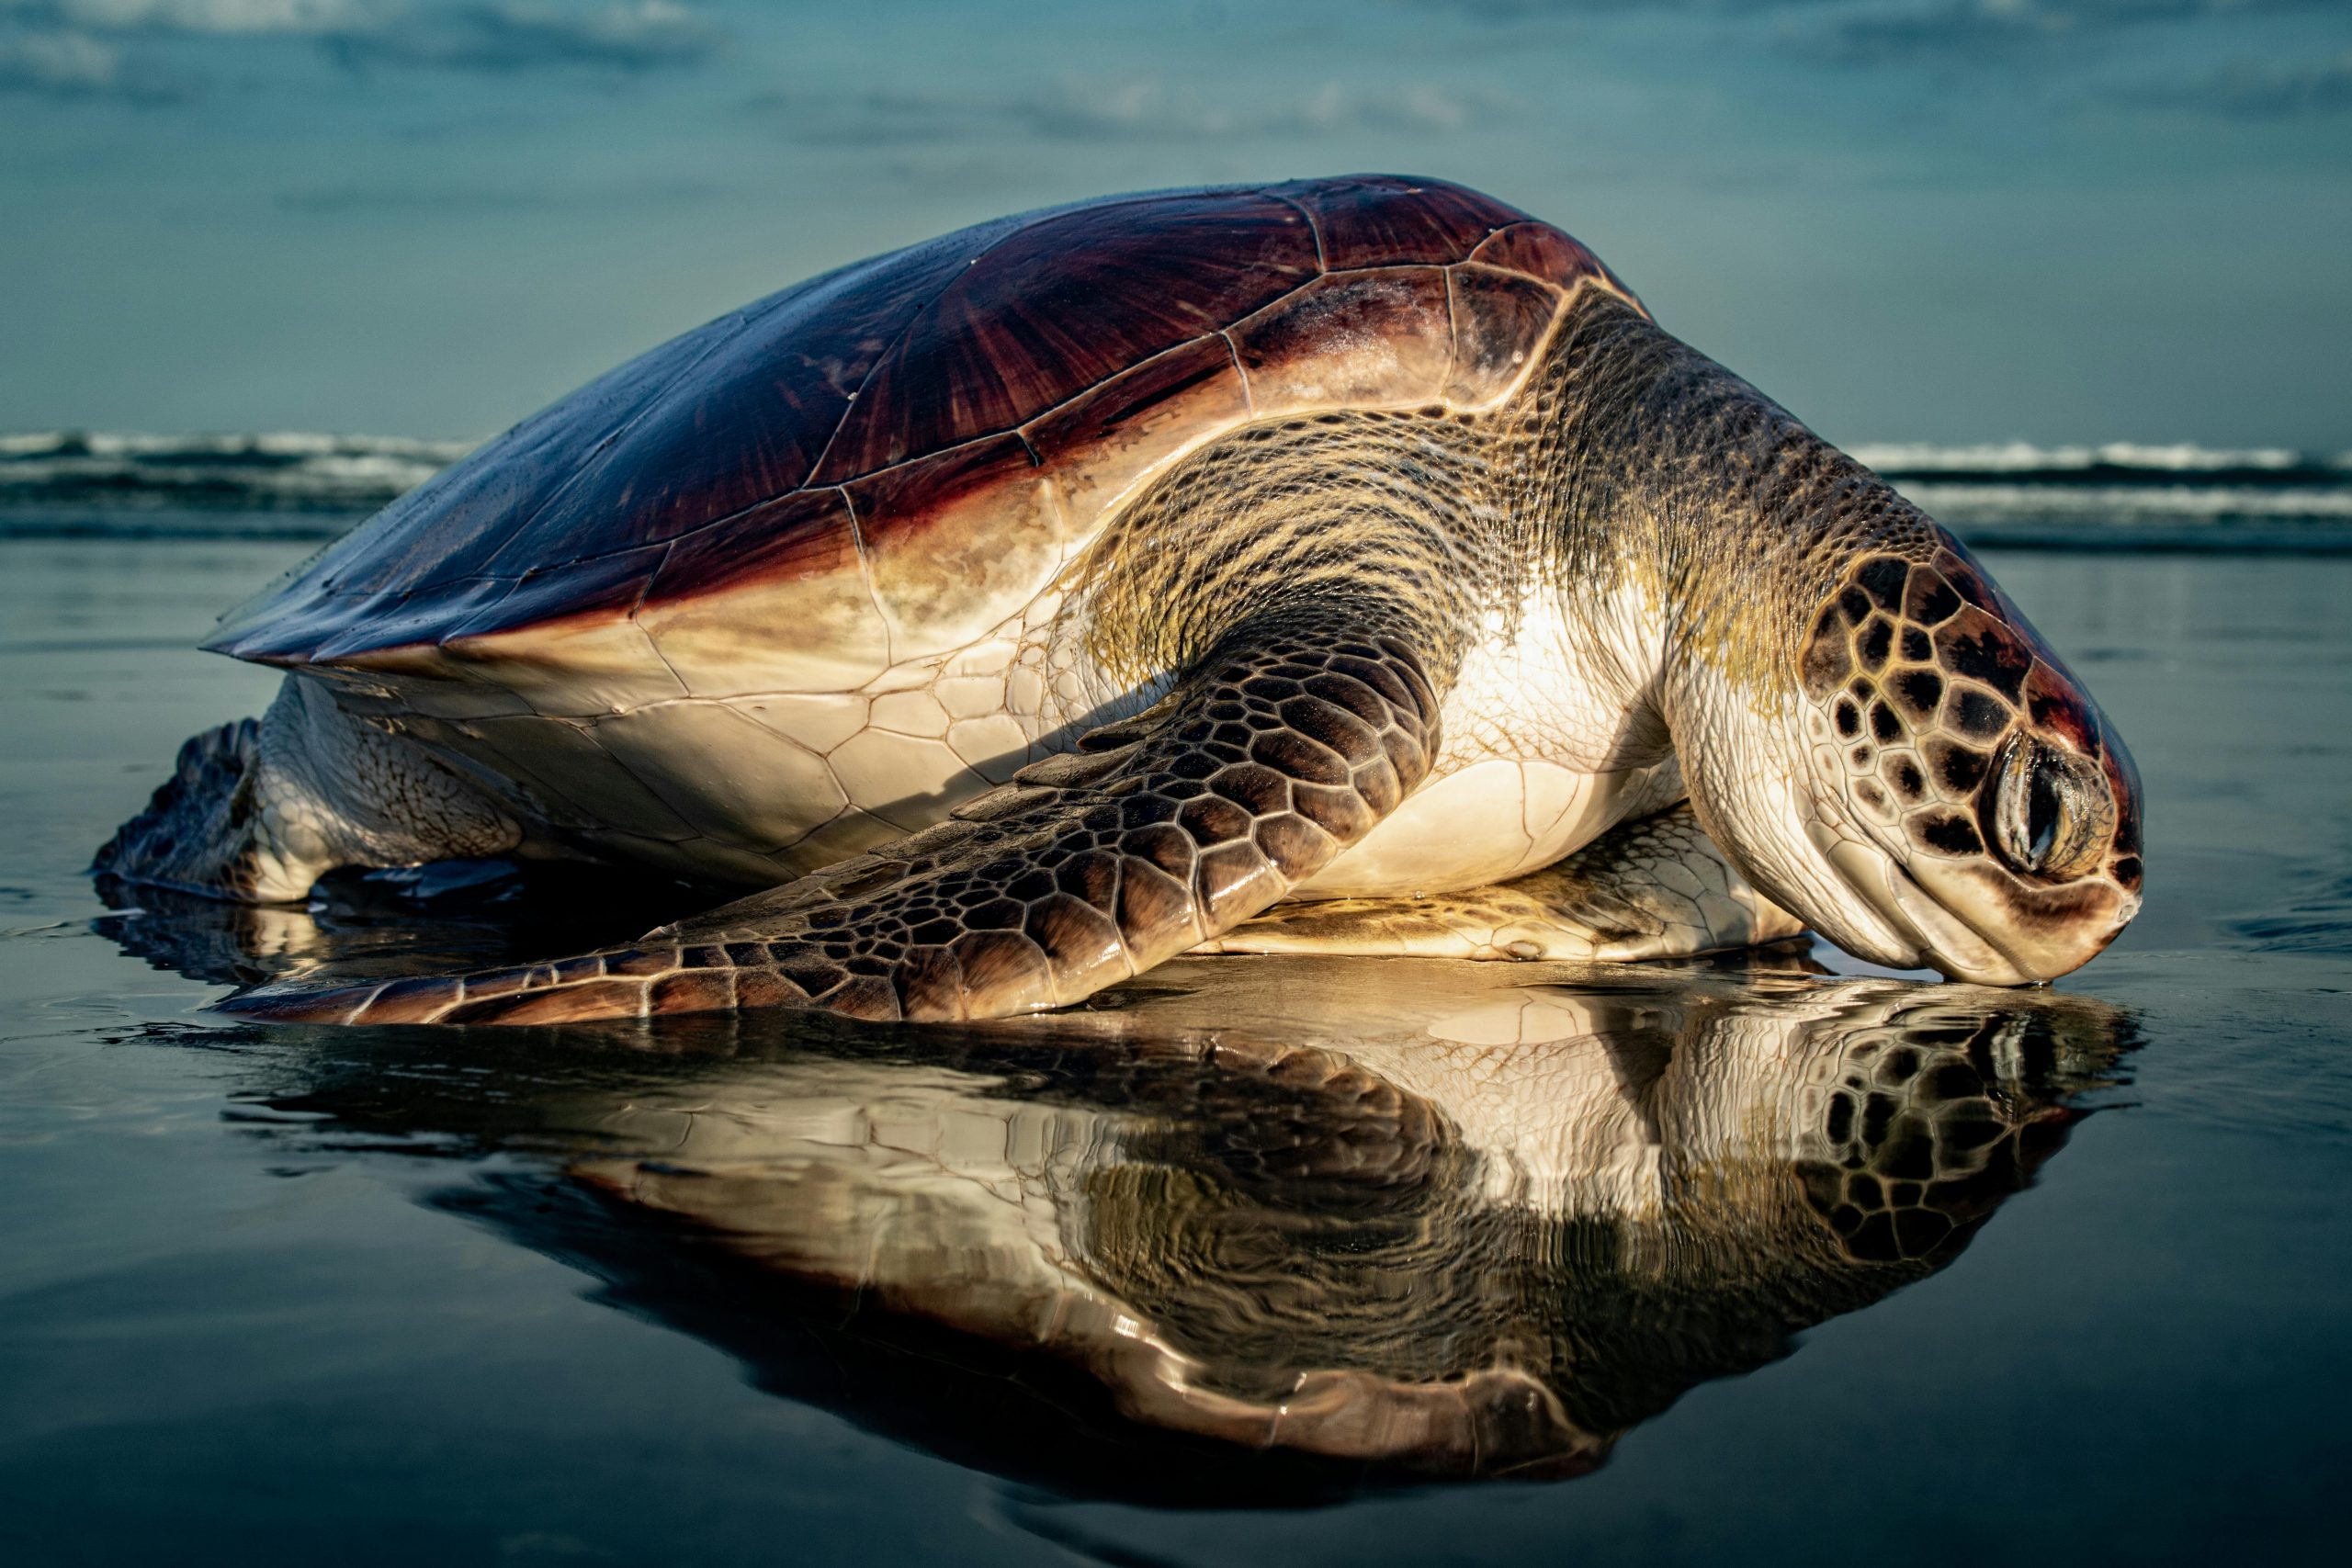 What Are Sea Turtle Shells Used For?